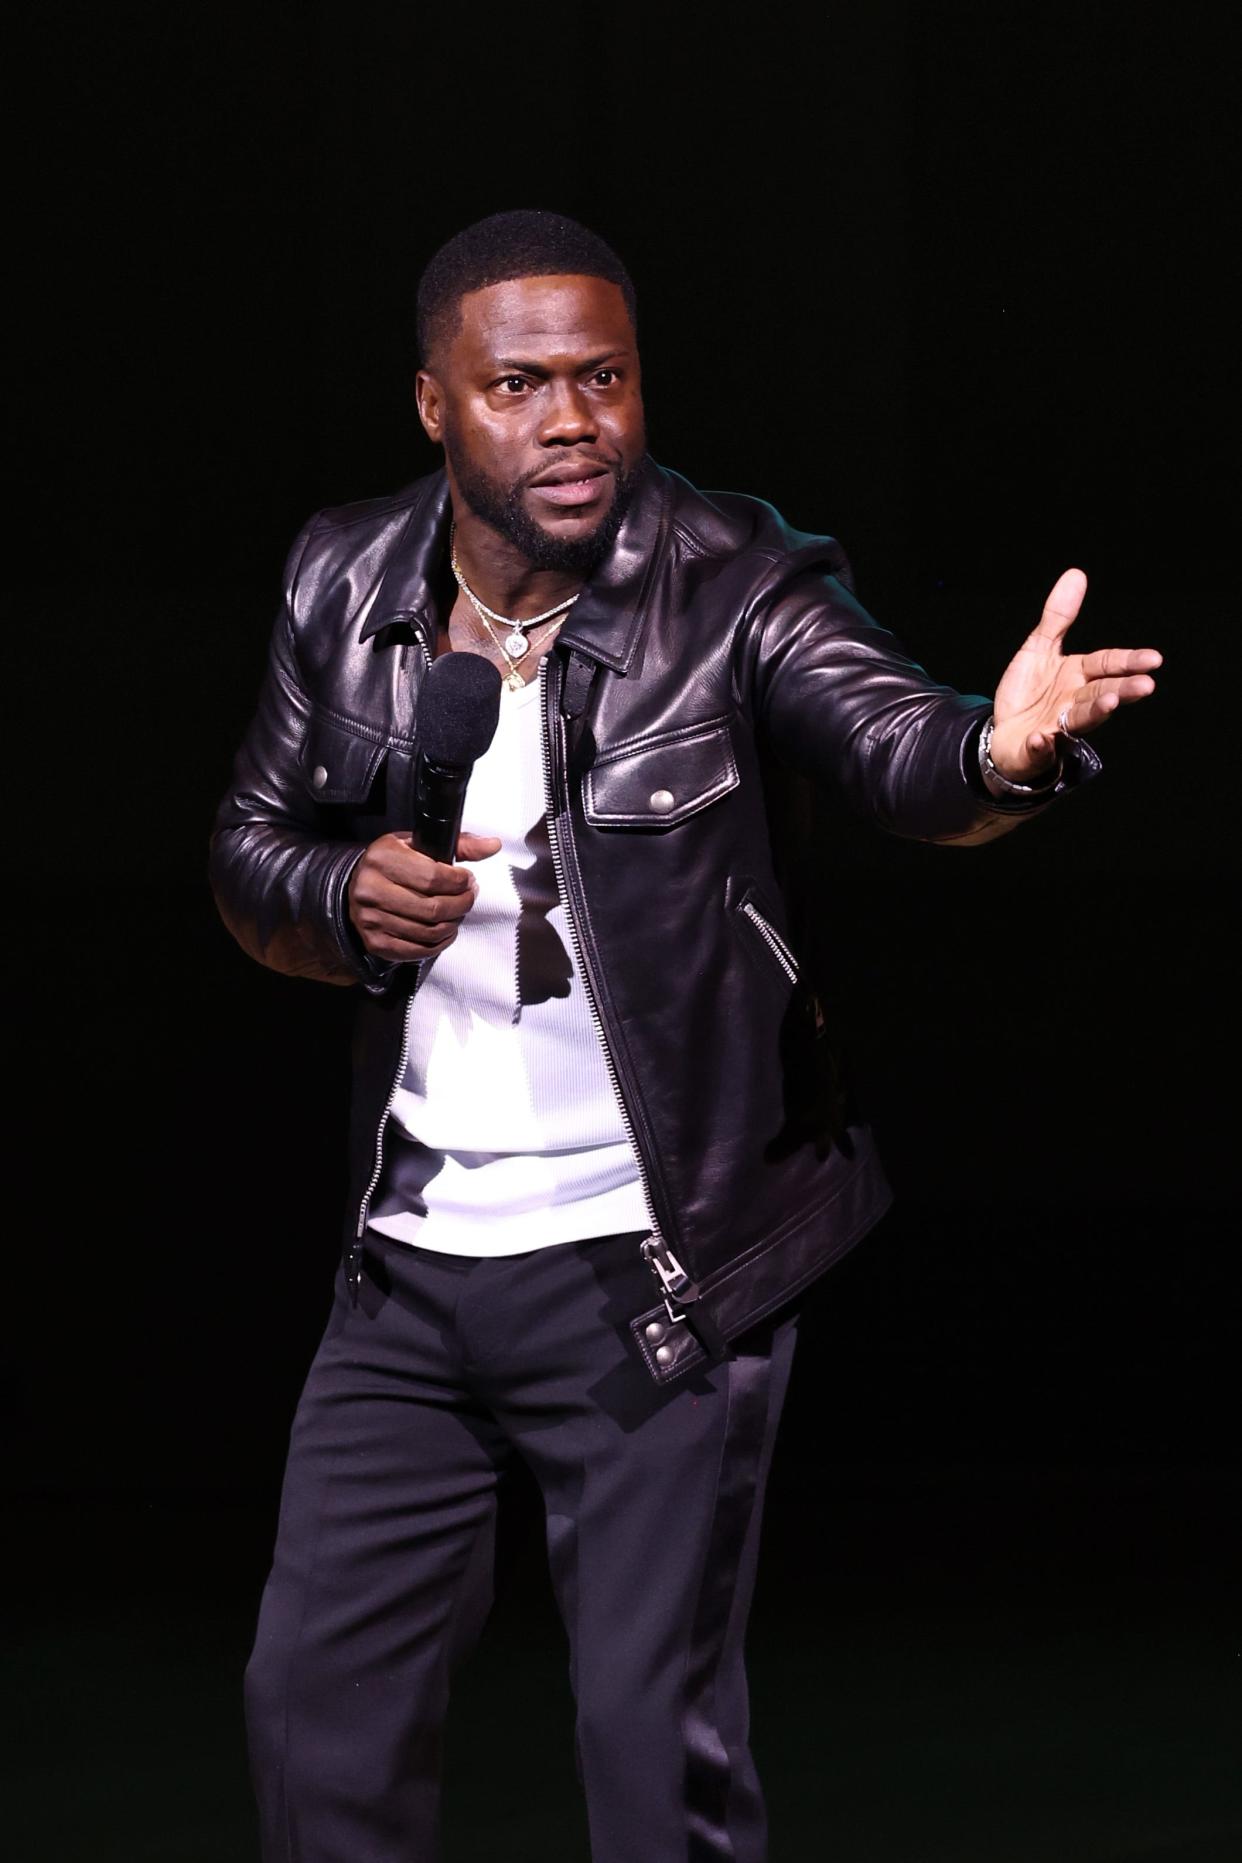 Comedian Kevin Hart has a 2-night stint at Andrew J. Brady Music Center this weekend.